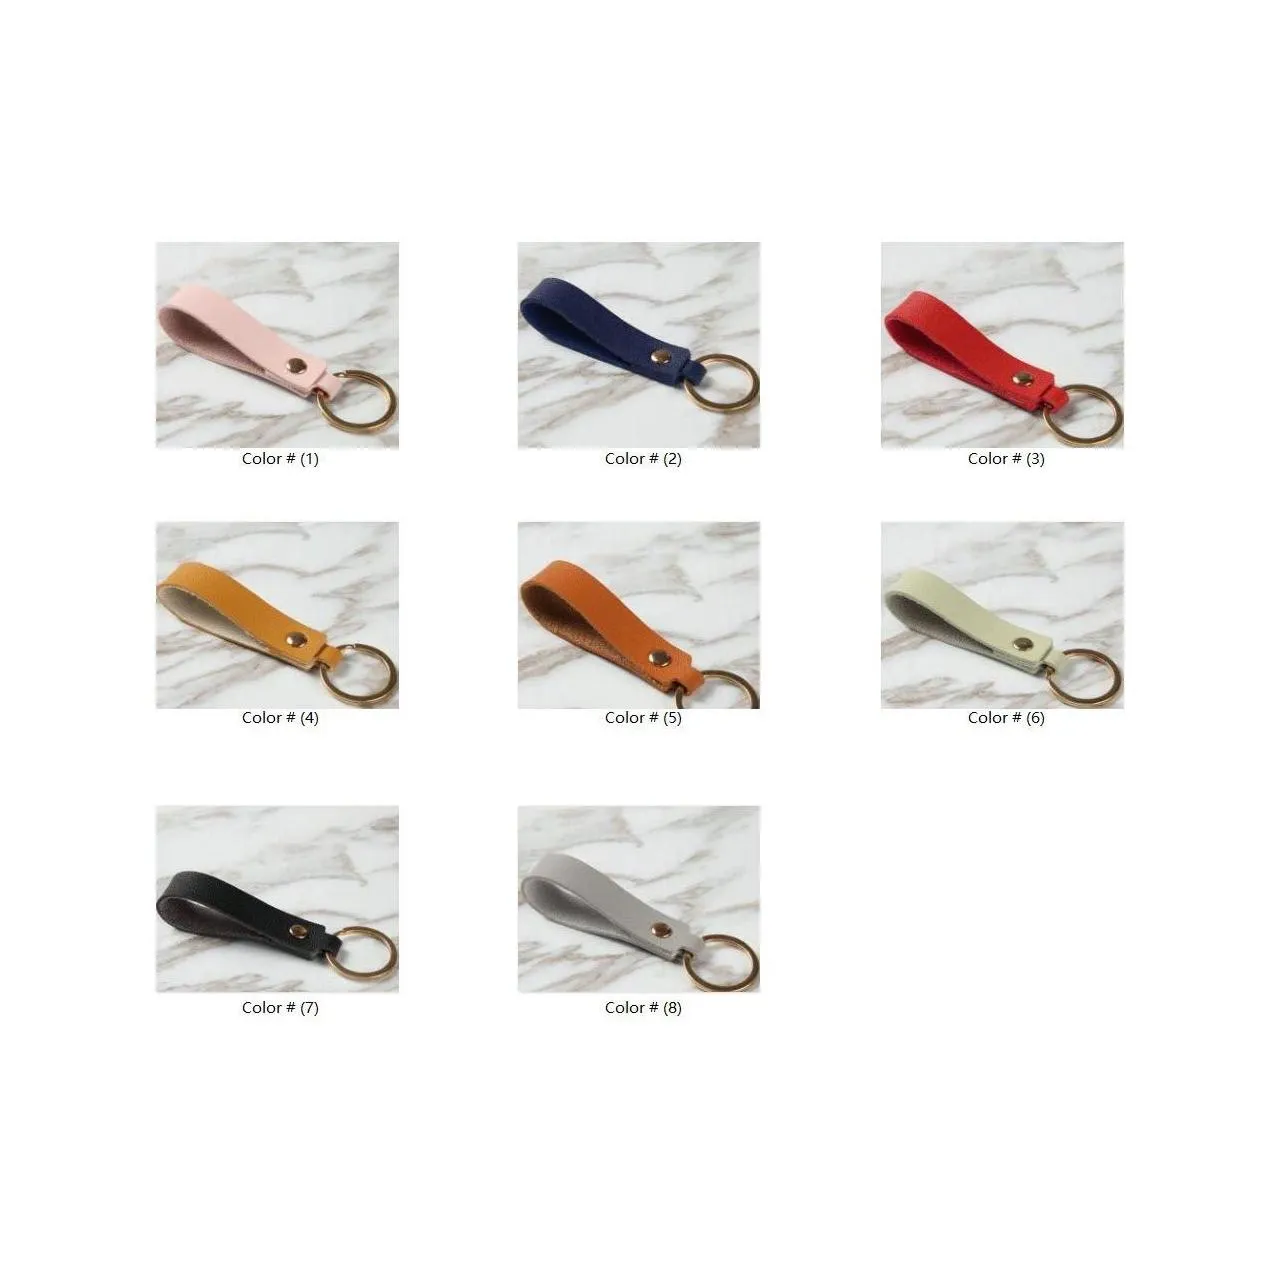 pu leather keychain casual leather strap lanyard key chain waist wallet keychains car keyring keyholder jewelry gift